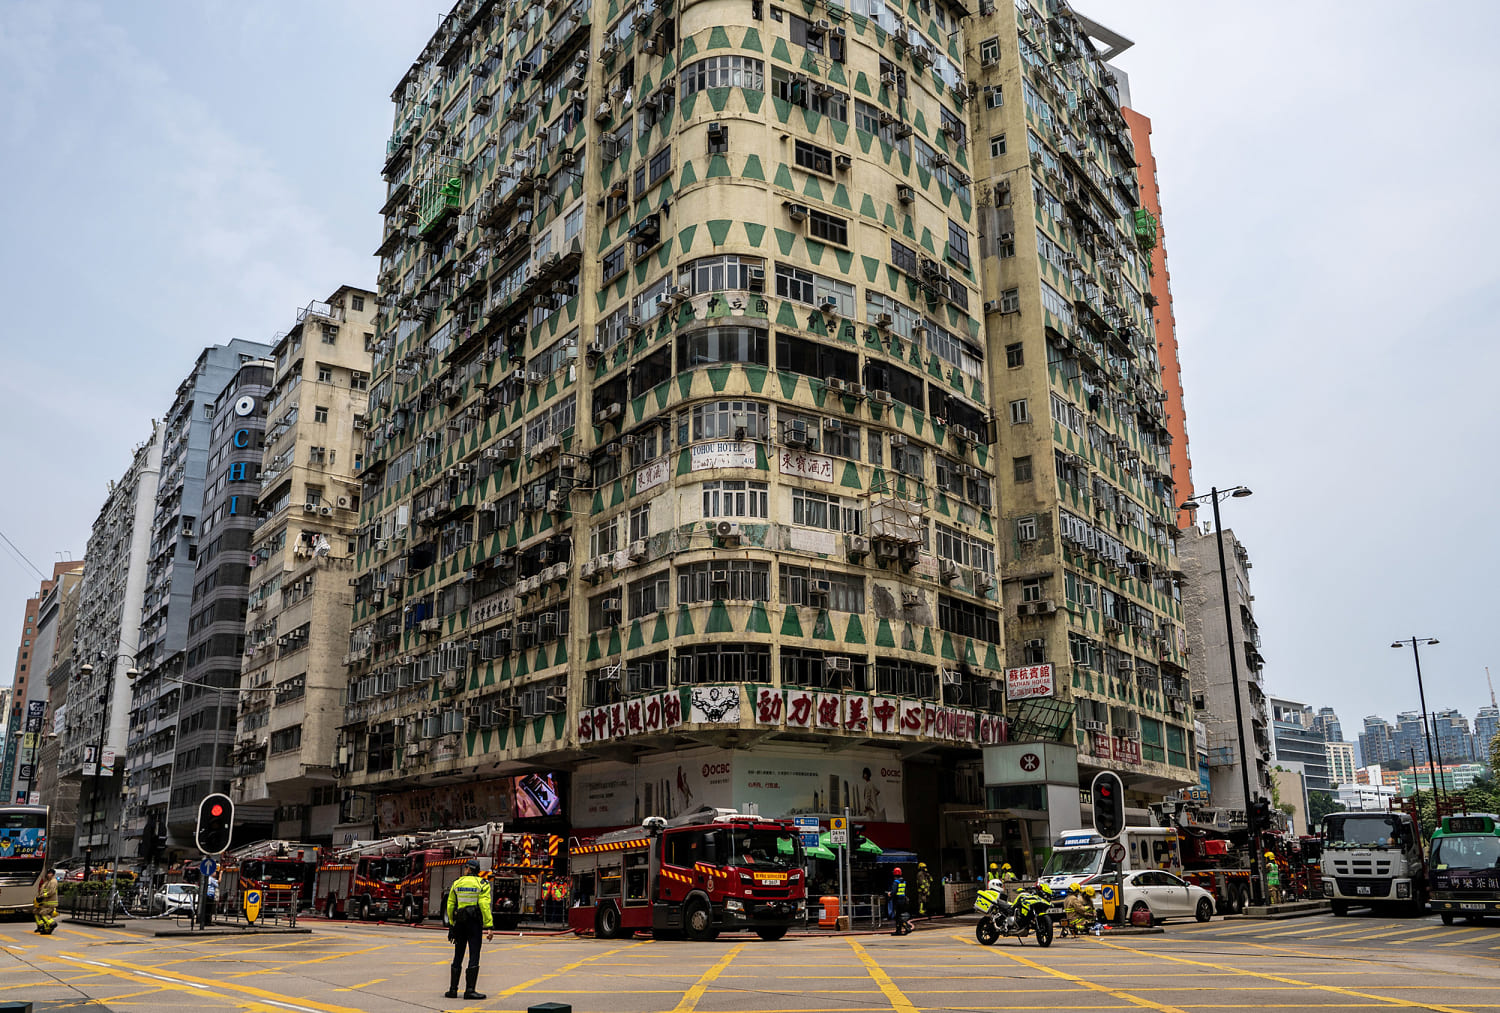 At least 5 dead after fire tears through Hong Kong building